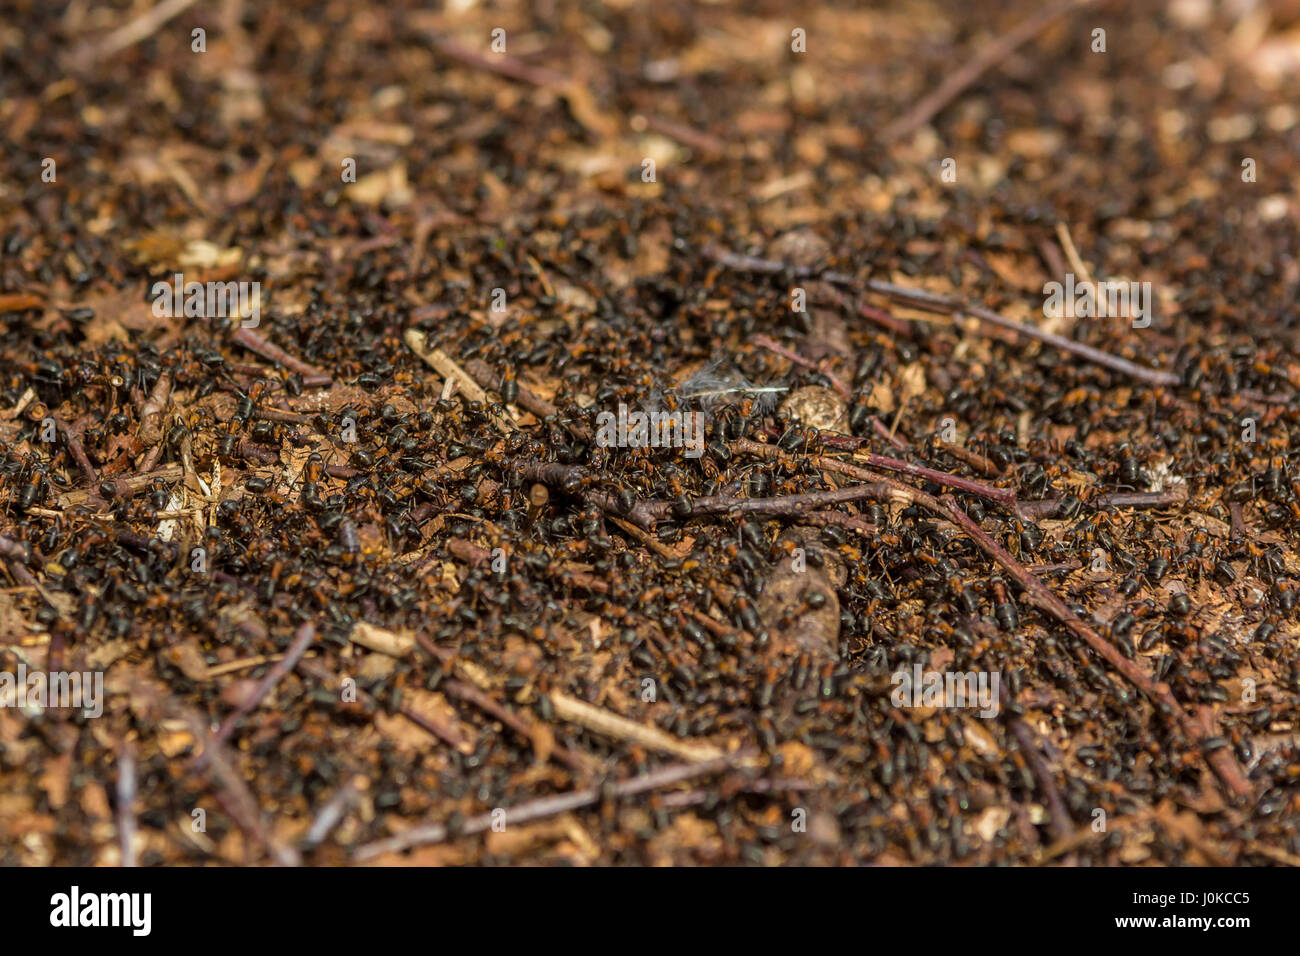 European red ants swarming on nest in forest Stock Photo